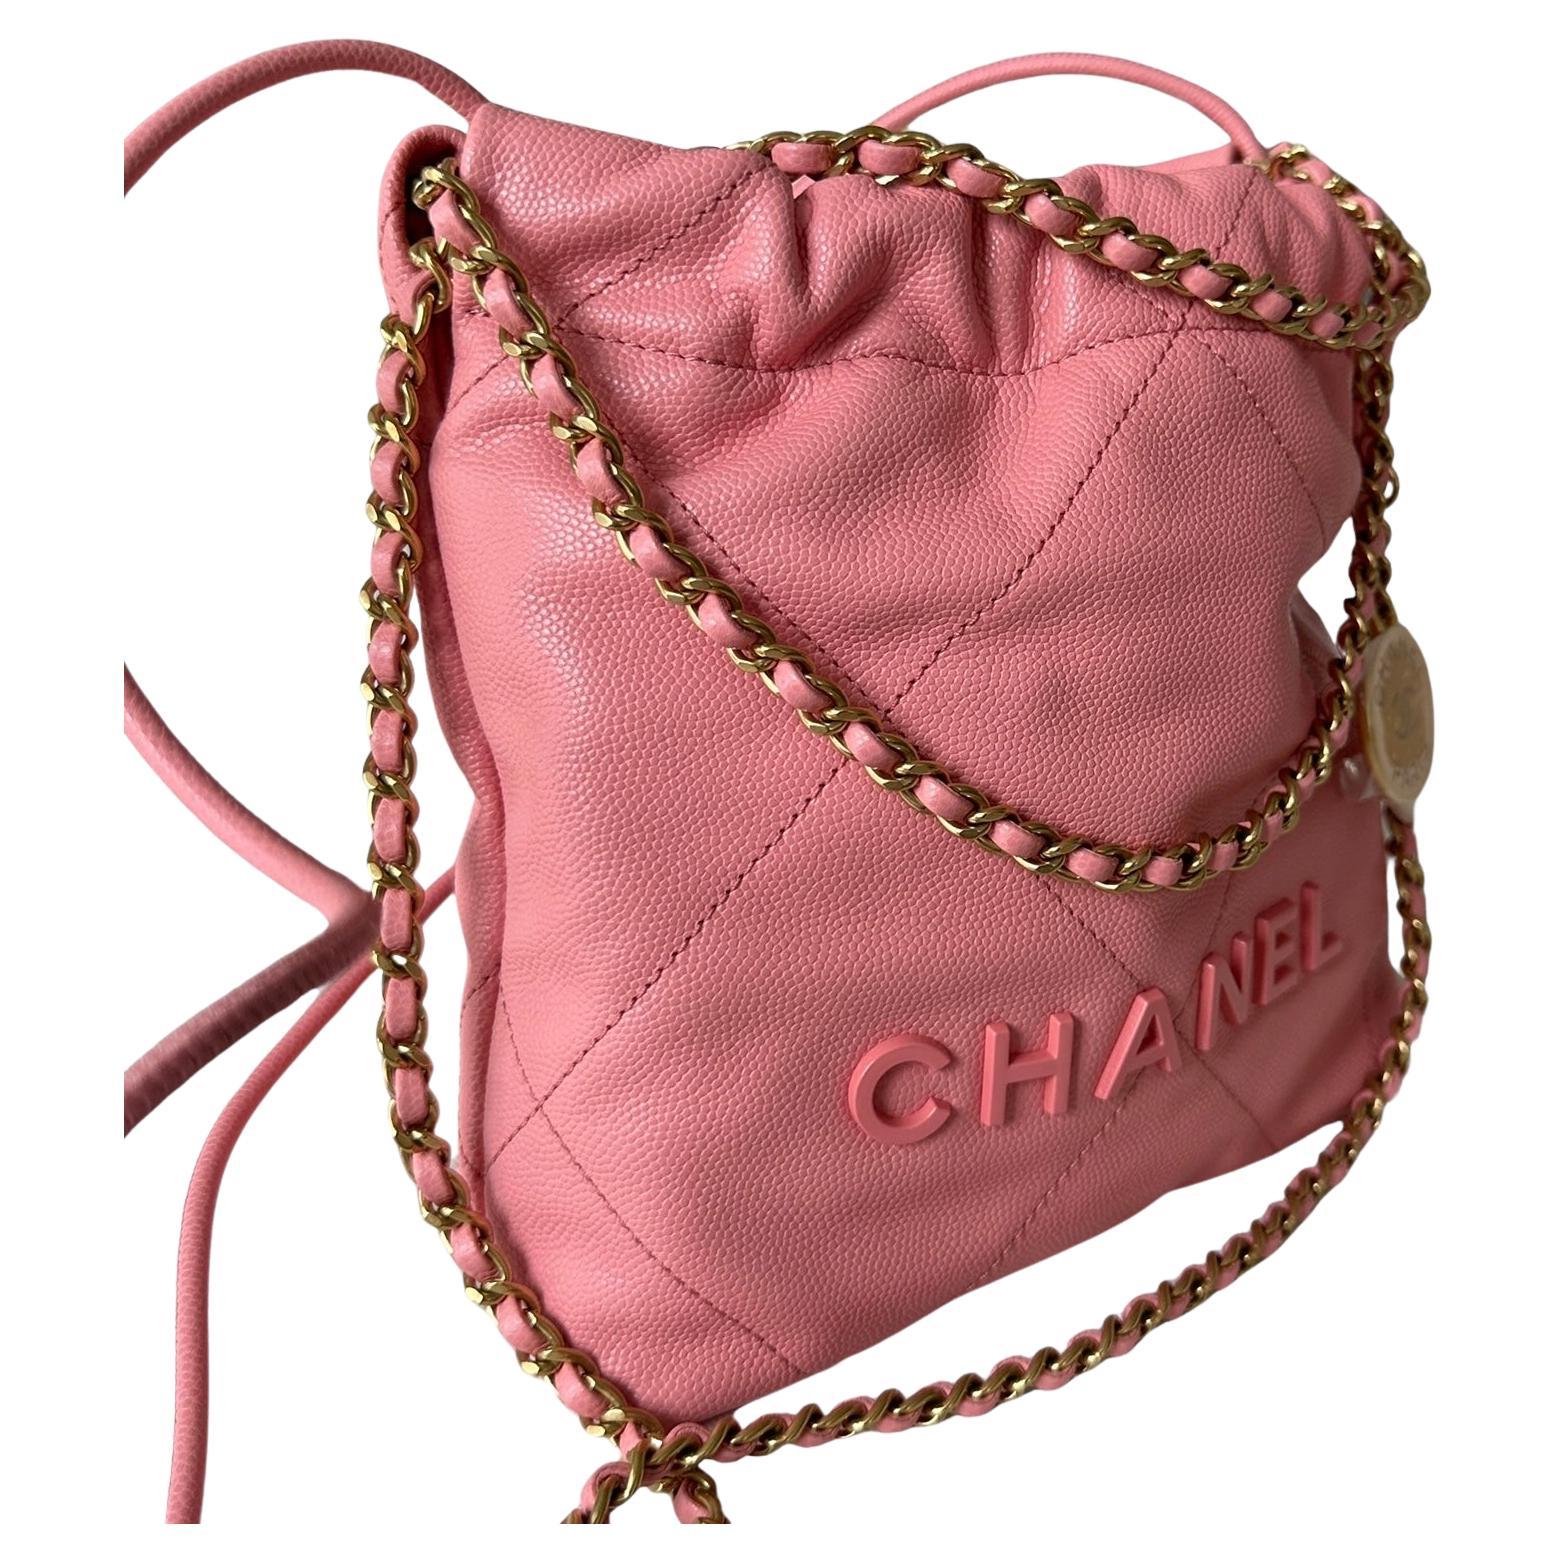 When did the Chanel 22 bag come out?